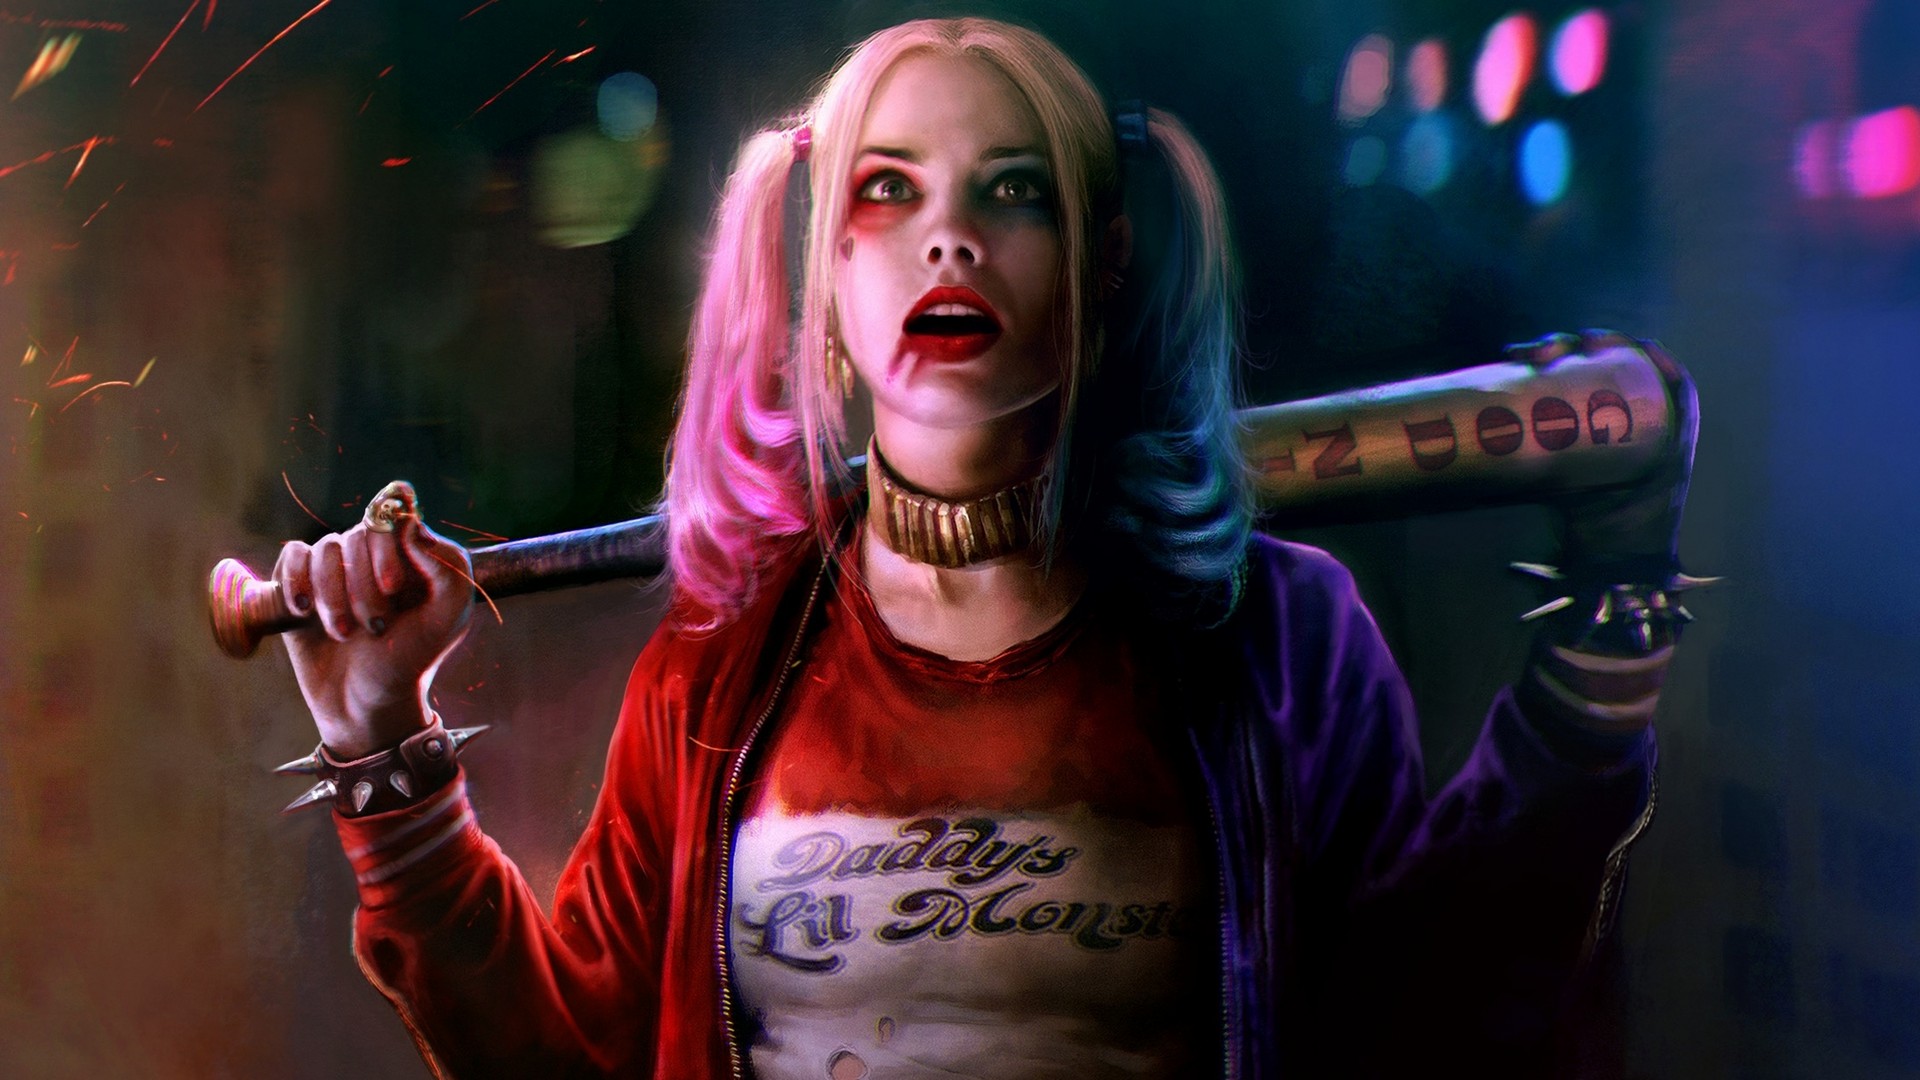 HD Wallpaper Harley Quinn With Resolution 1920X1080 pixel. You can make this wallpaper for your Desktop Computer Backgrounds, Mac Wallpapers, Android Lock screen or iPhone Screensavers